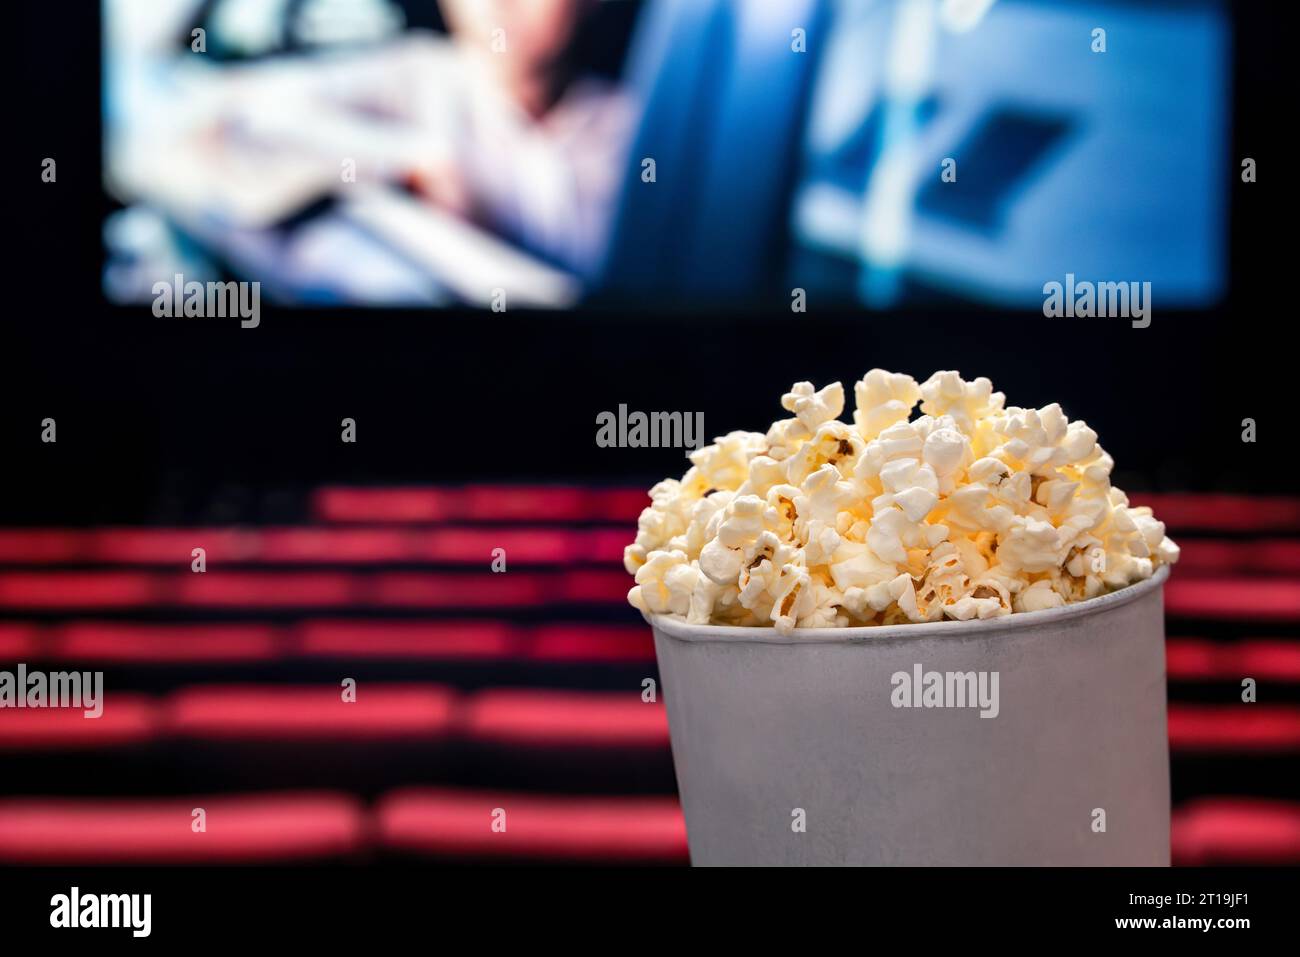 Movies and popcorn. Pop corn at cinema. Family film night concept. Action or romantic comedy entertainment on screen. Dark theater with red seats. Stock Photo